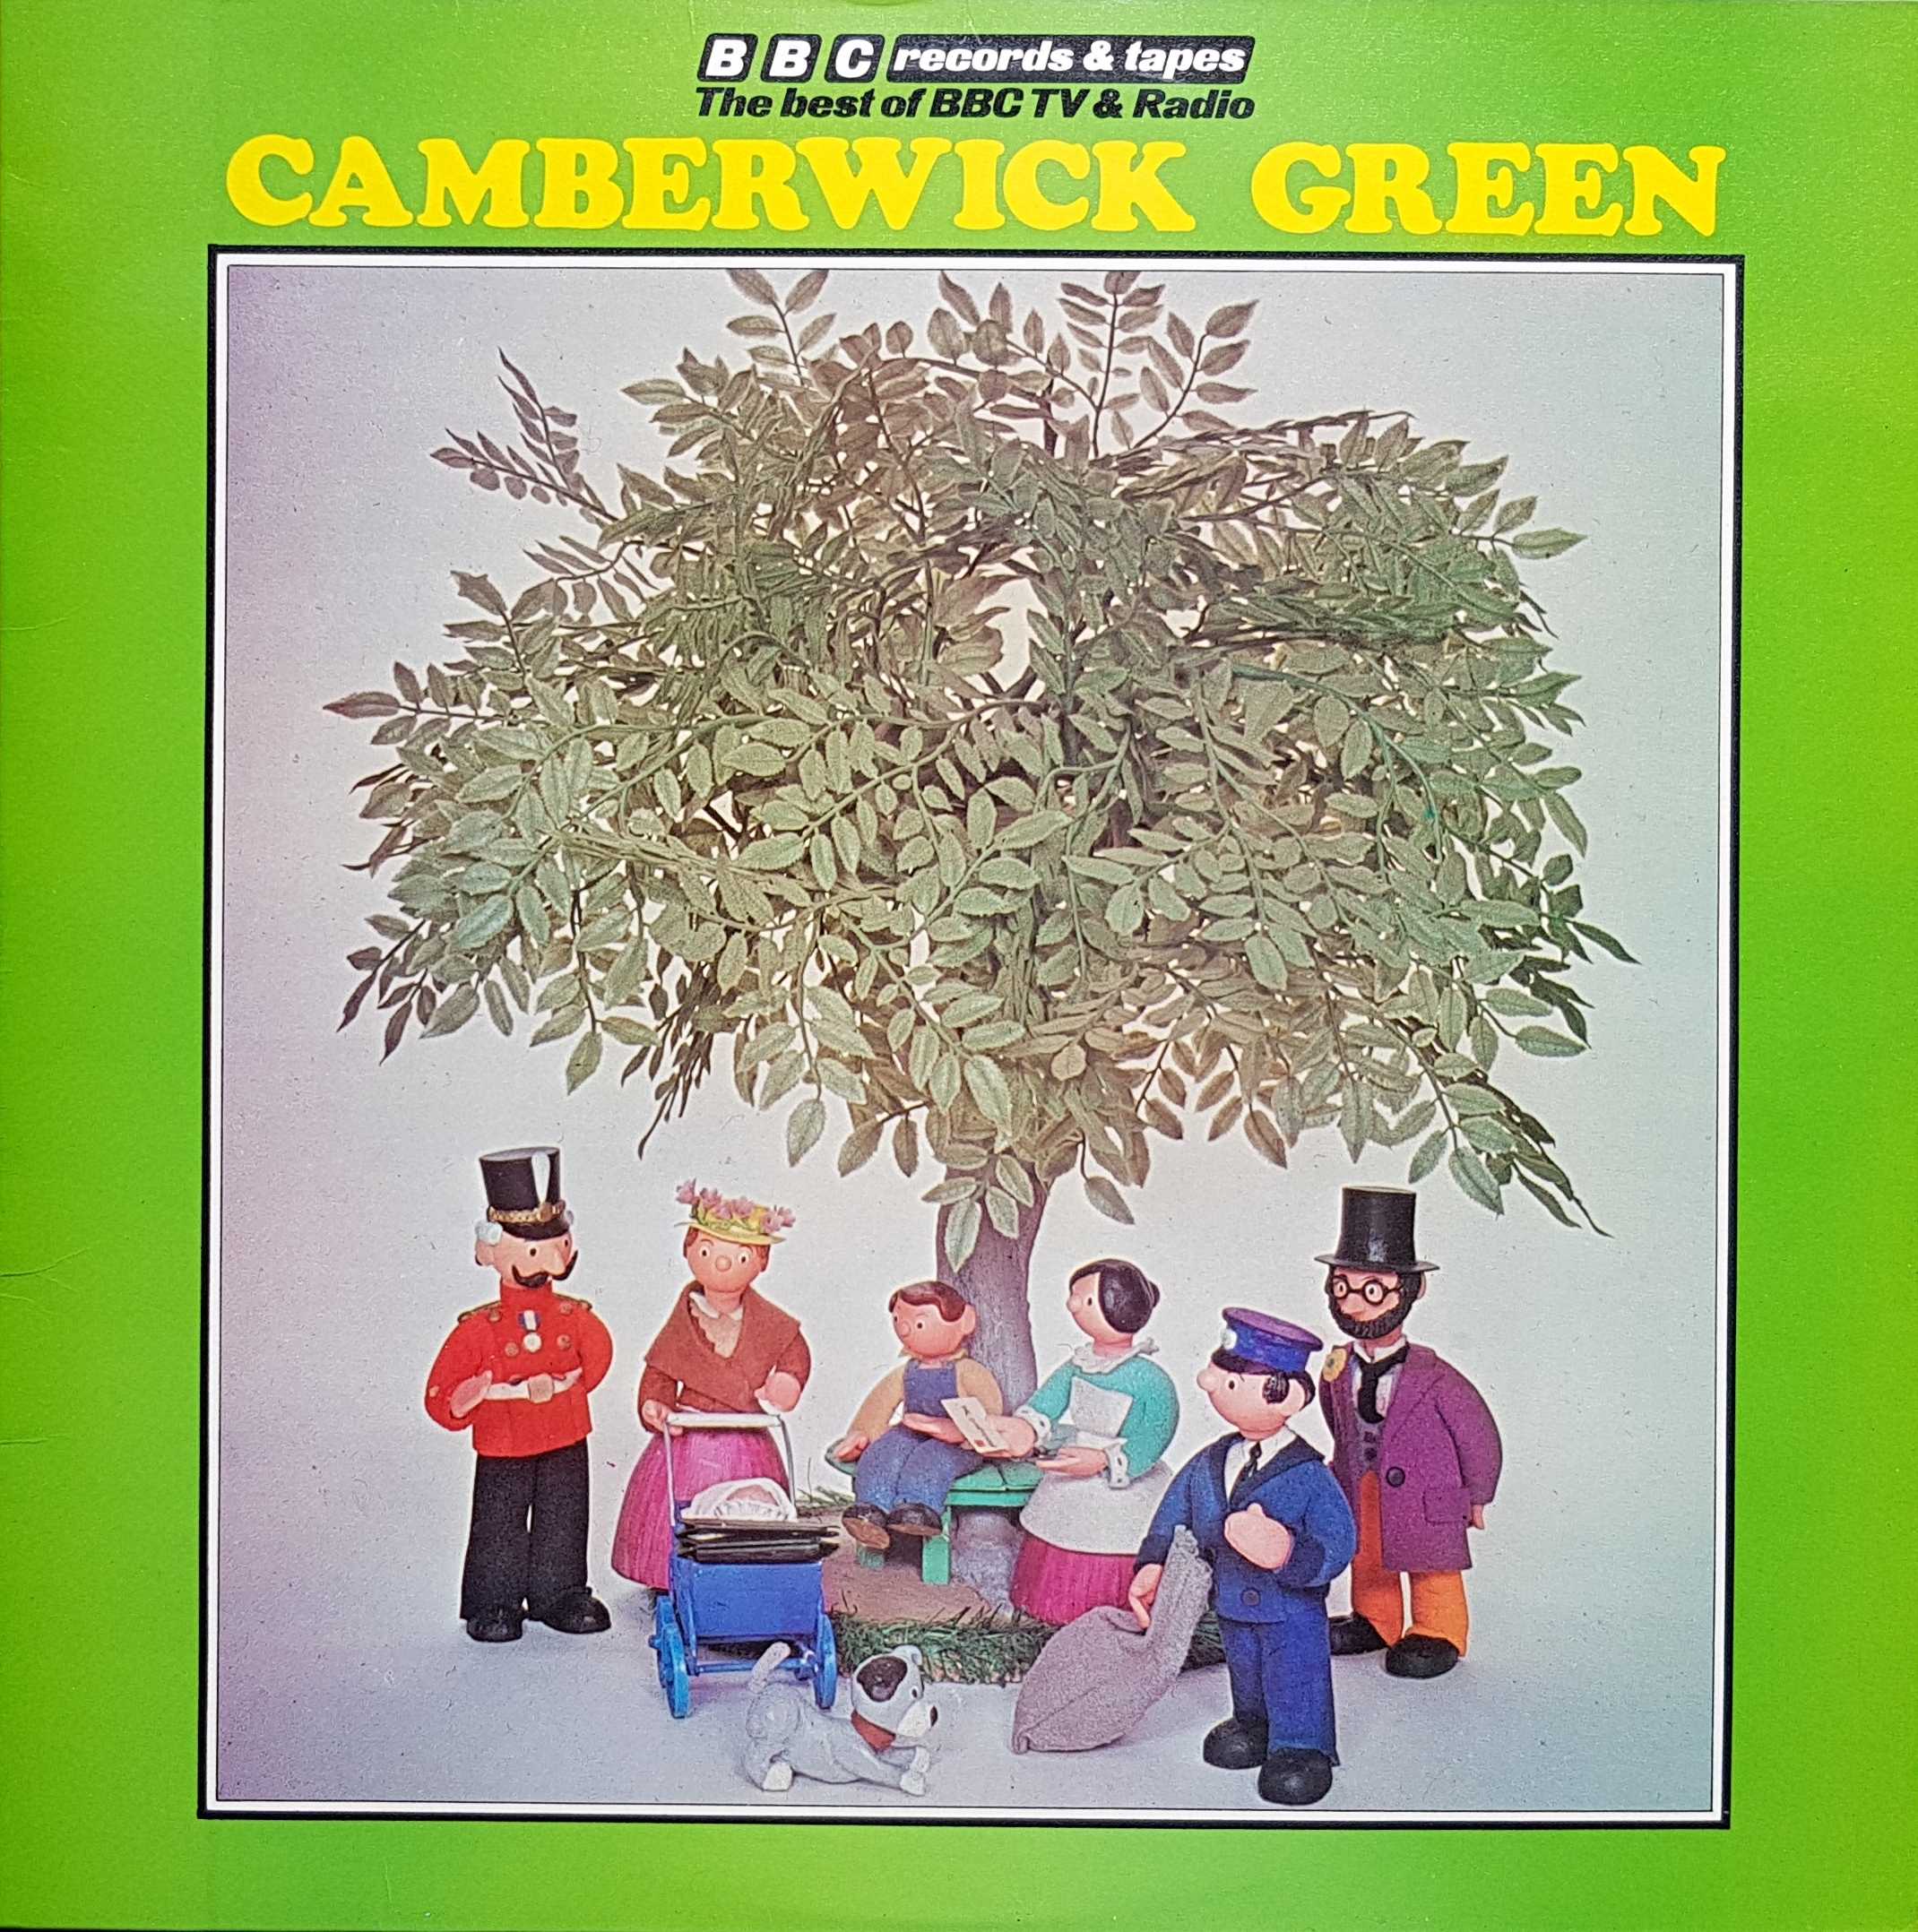 Picture of REC 263 Camberwick Green by artist Brian Cant / Freddie Phillips from the BBC albums - Records and Tapes library